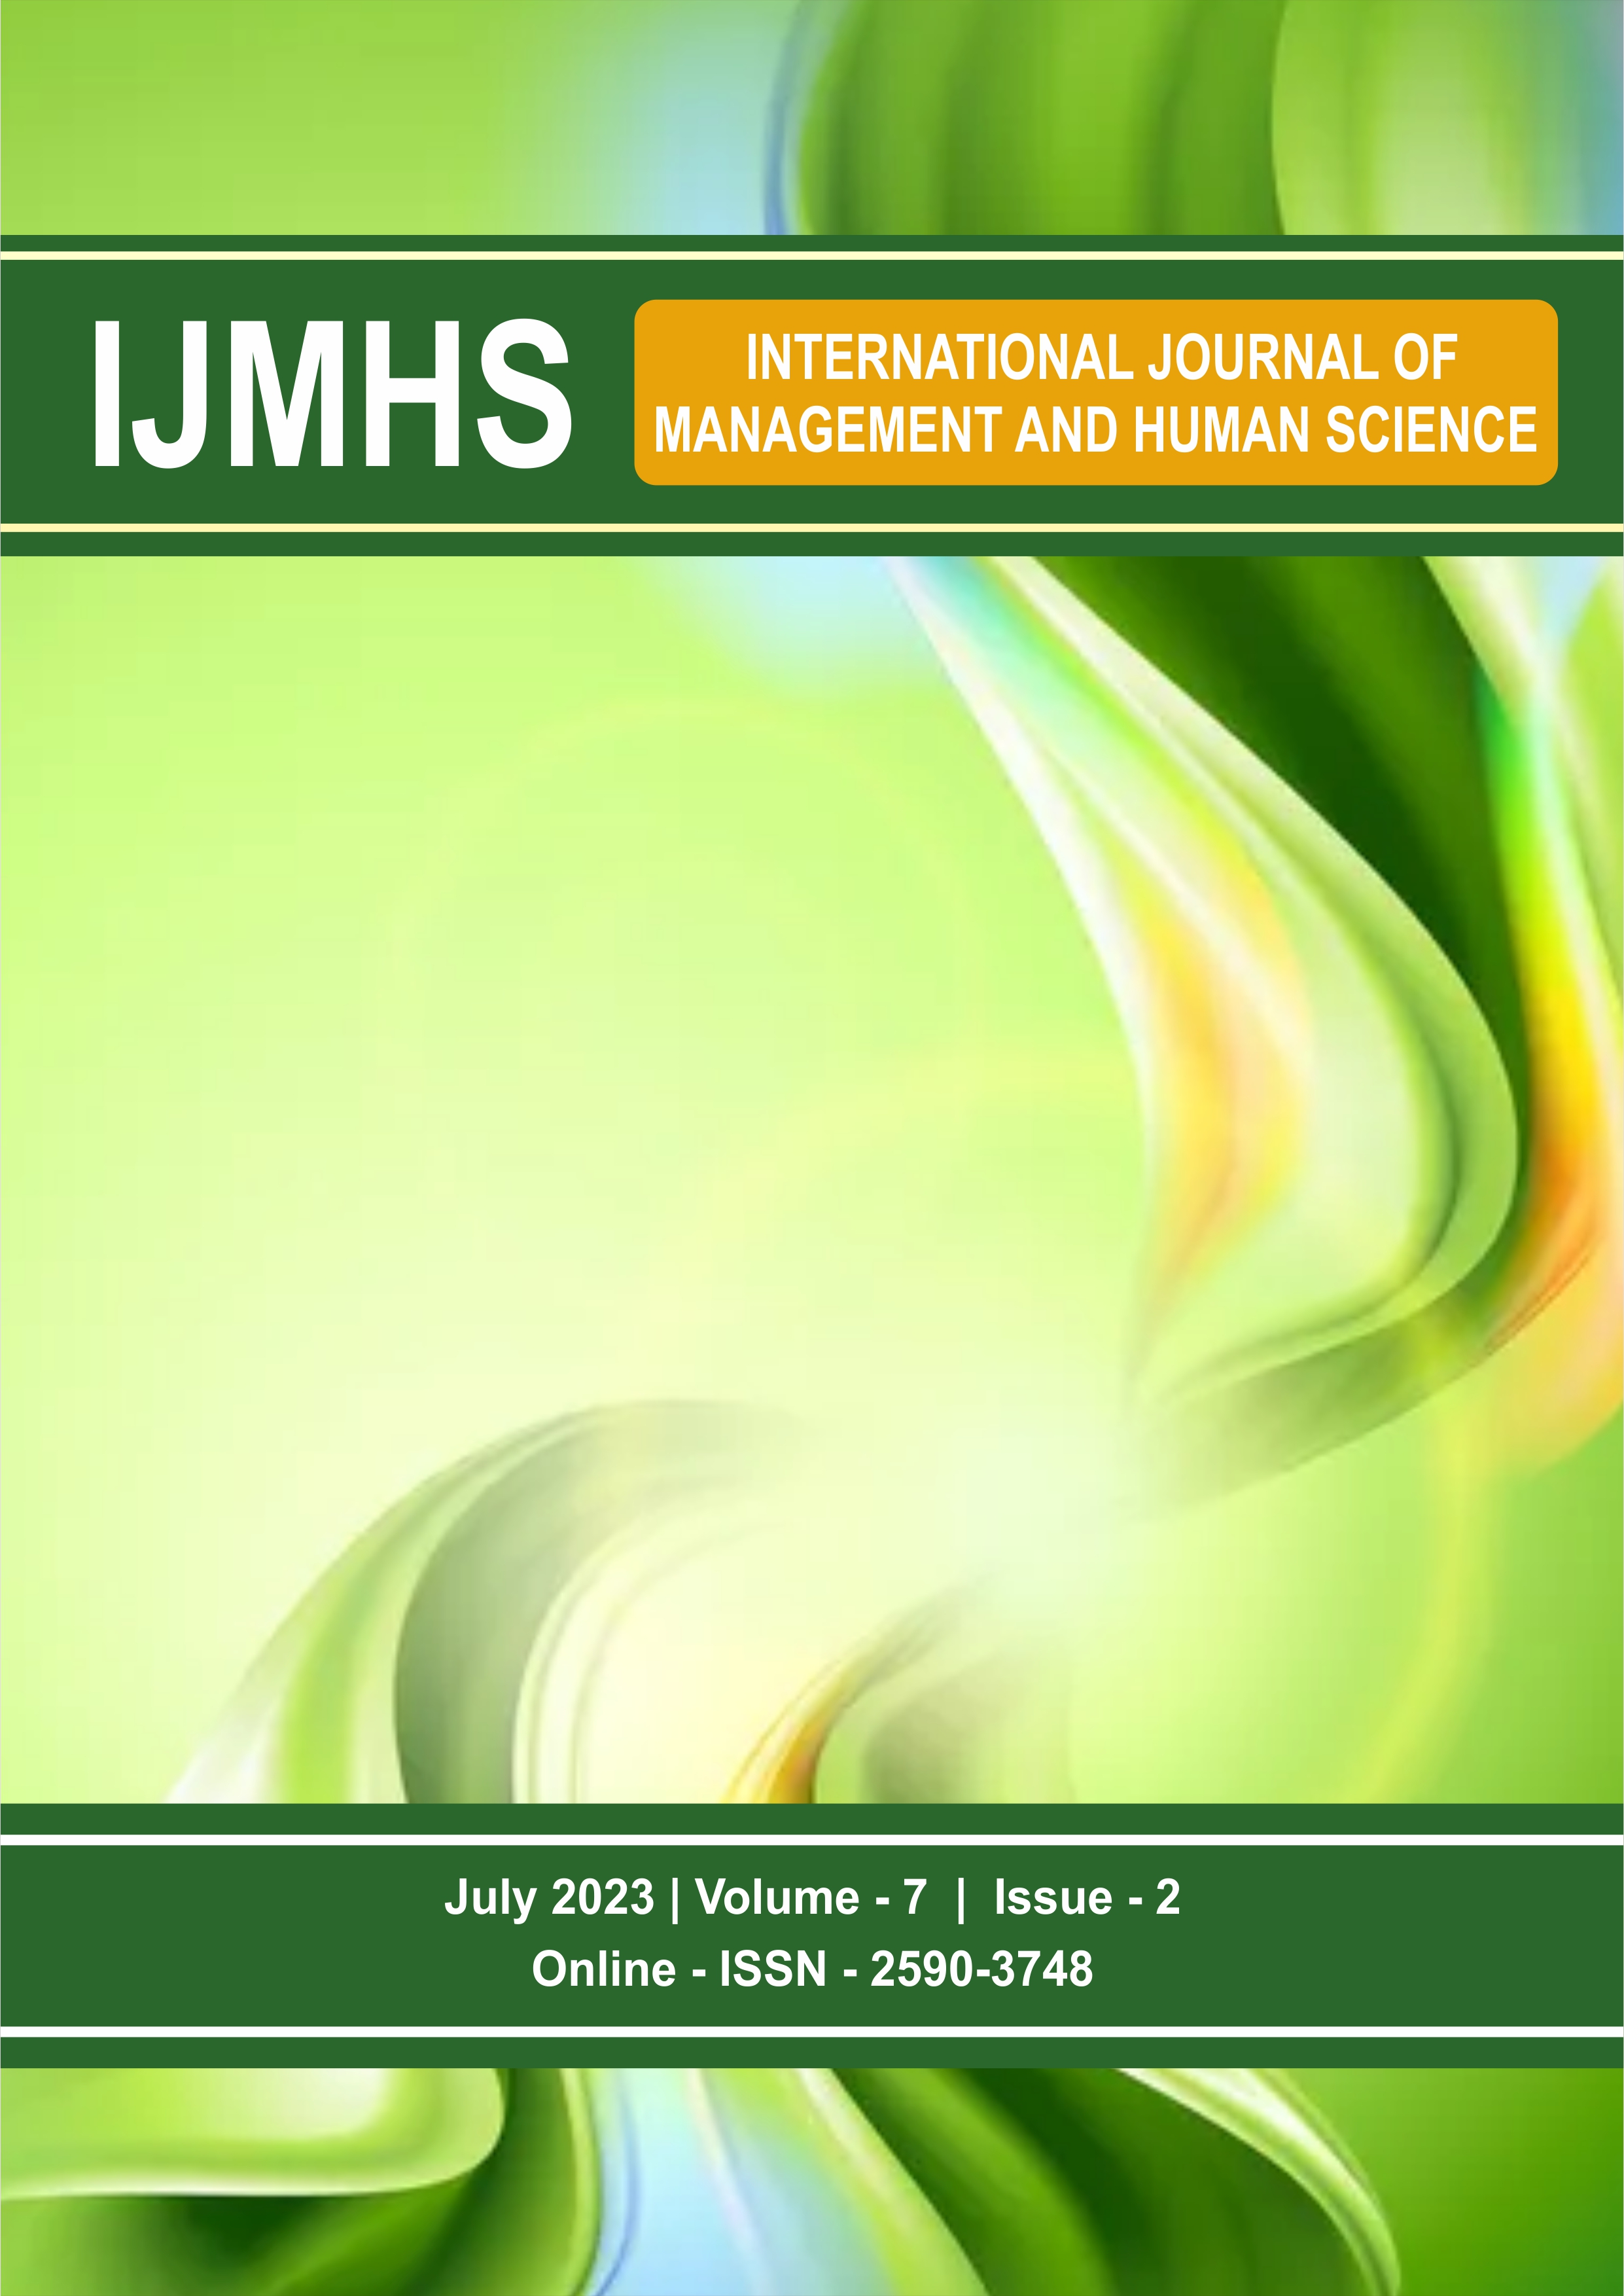 					View Vol. 7 No. 2 (2023): International Journal of Management and Human Science (IJMHS) 
				